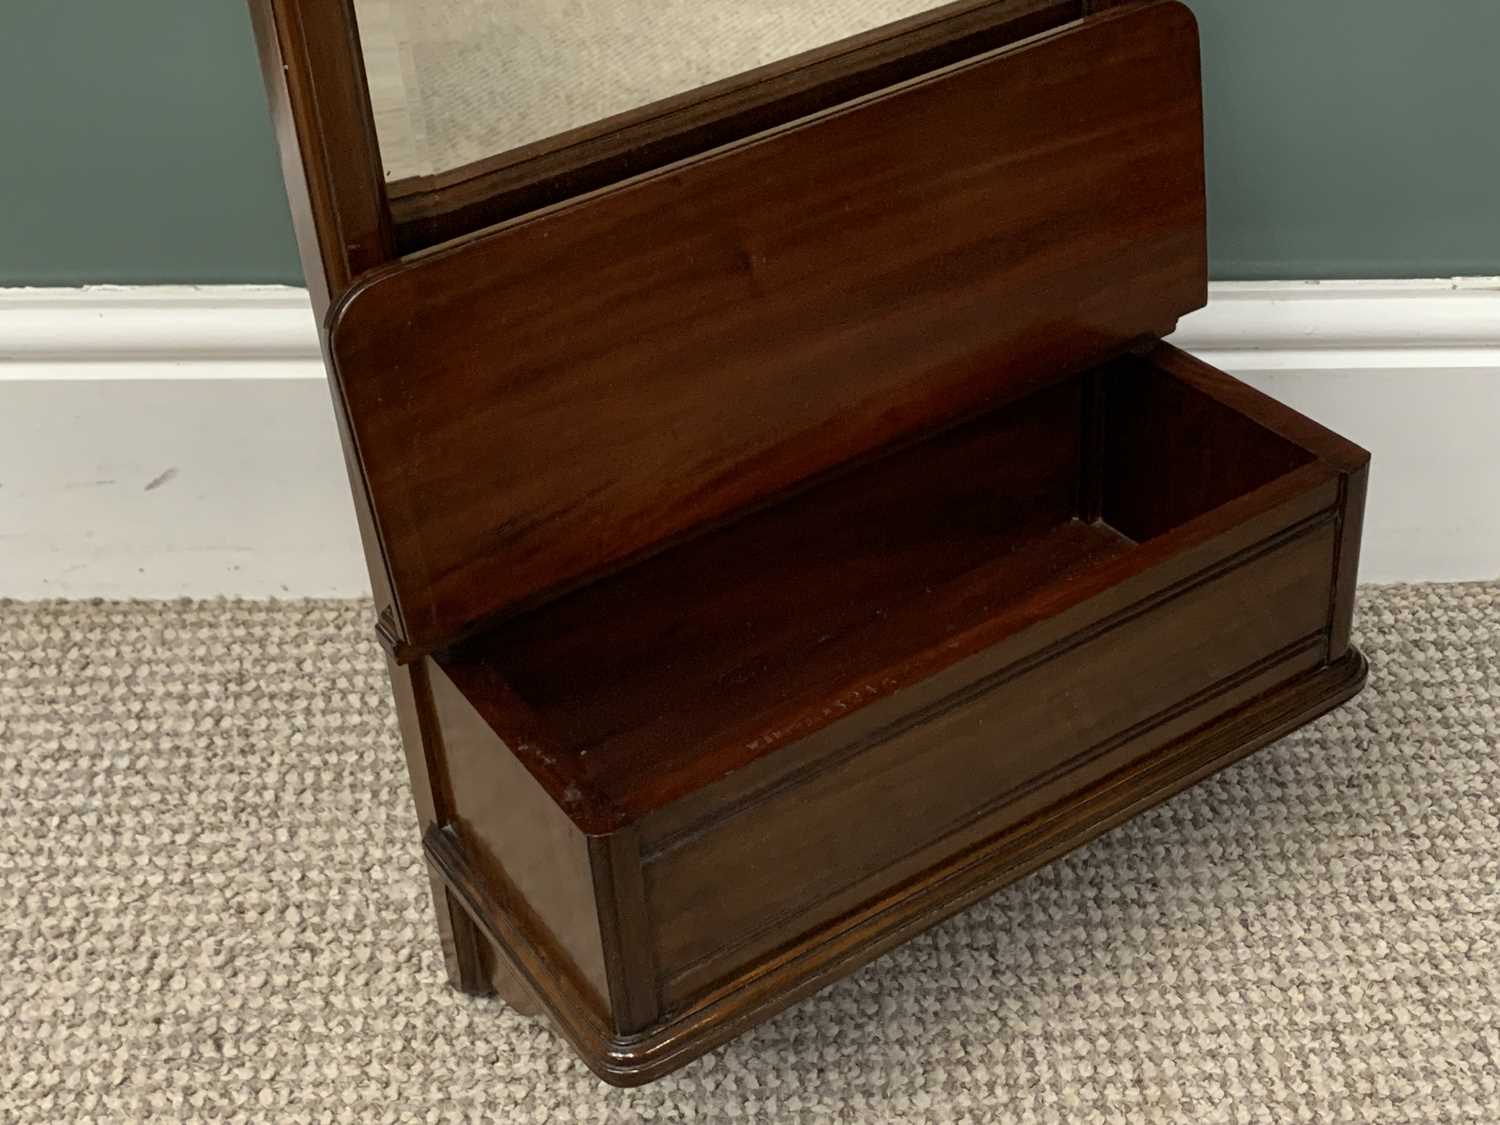 VICTORIAN MAHOGANY WALL MIRROR, with base drawer and bevelled glass, 66 (h) x 35 (w) x 17?cms (d) - Image 2 of 3